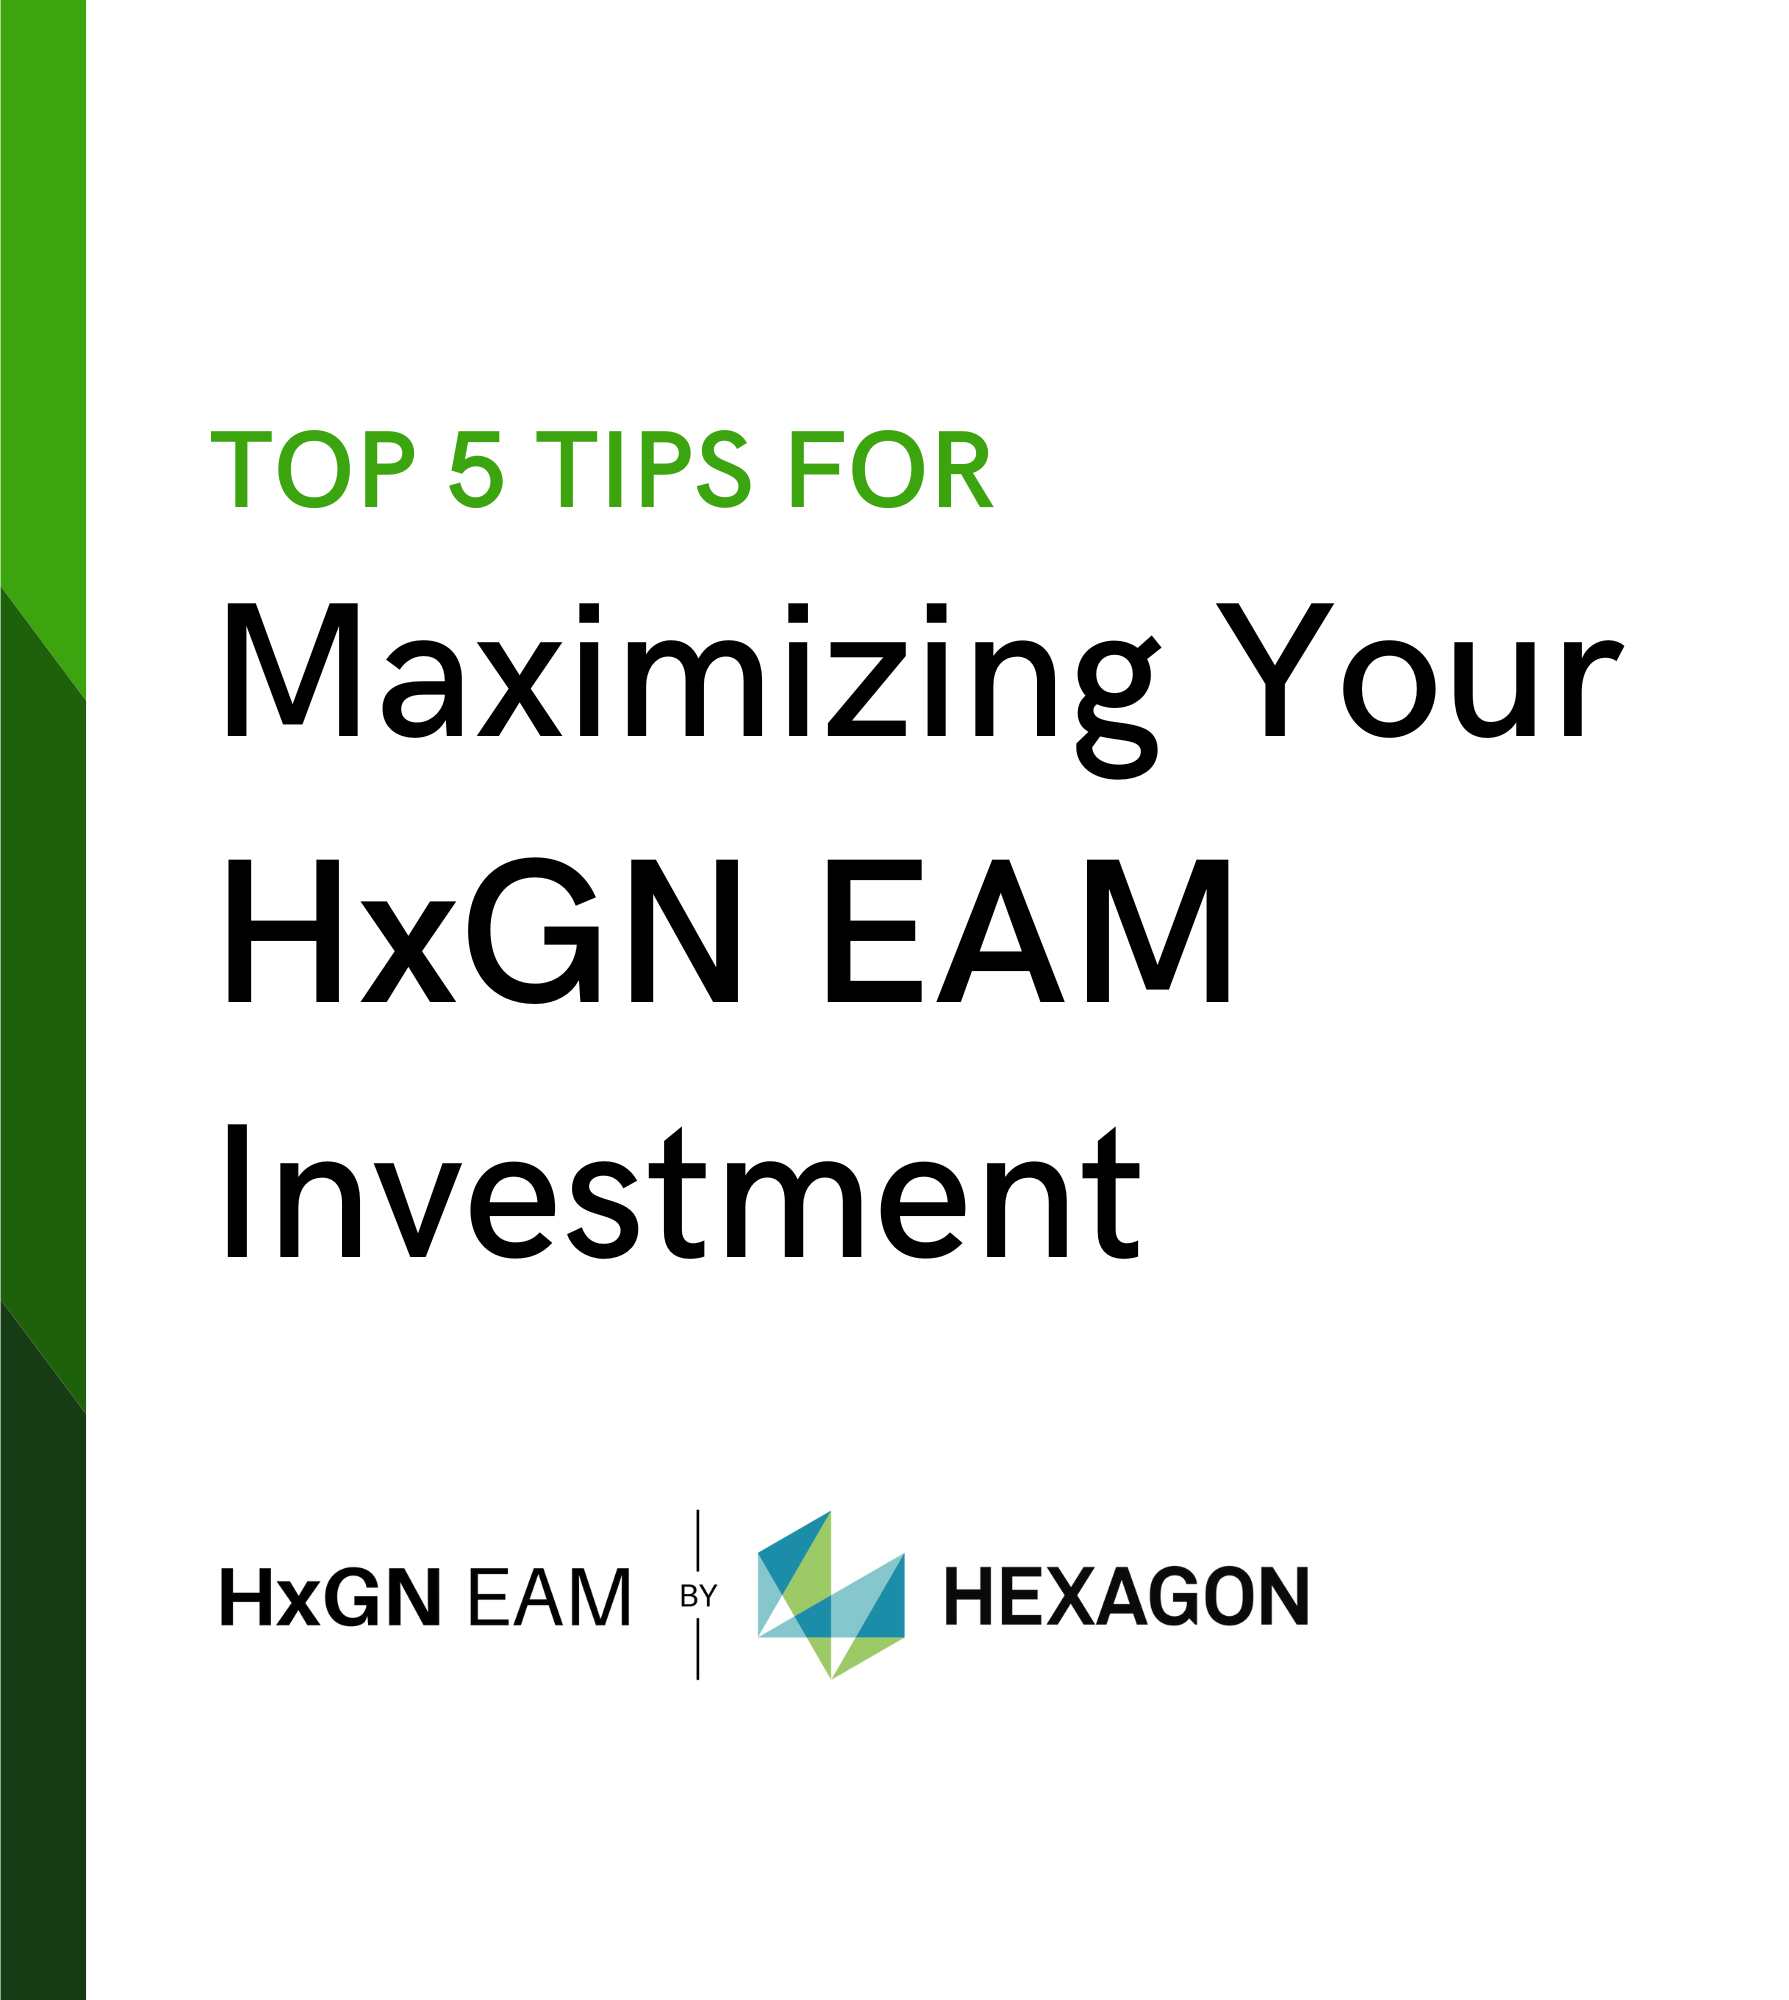 Top 5 Tips for Maximizing Your HxGN EAM Investment